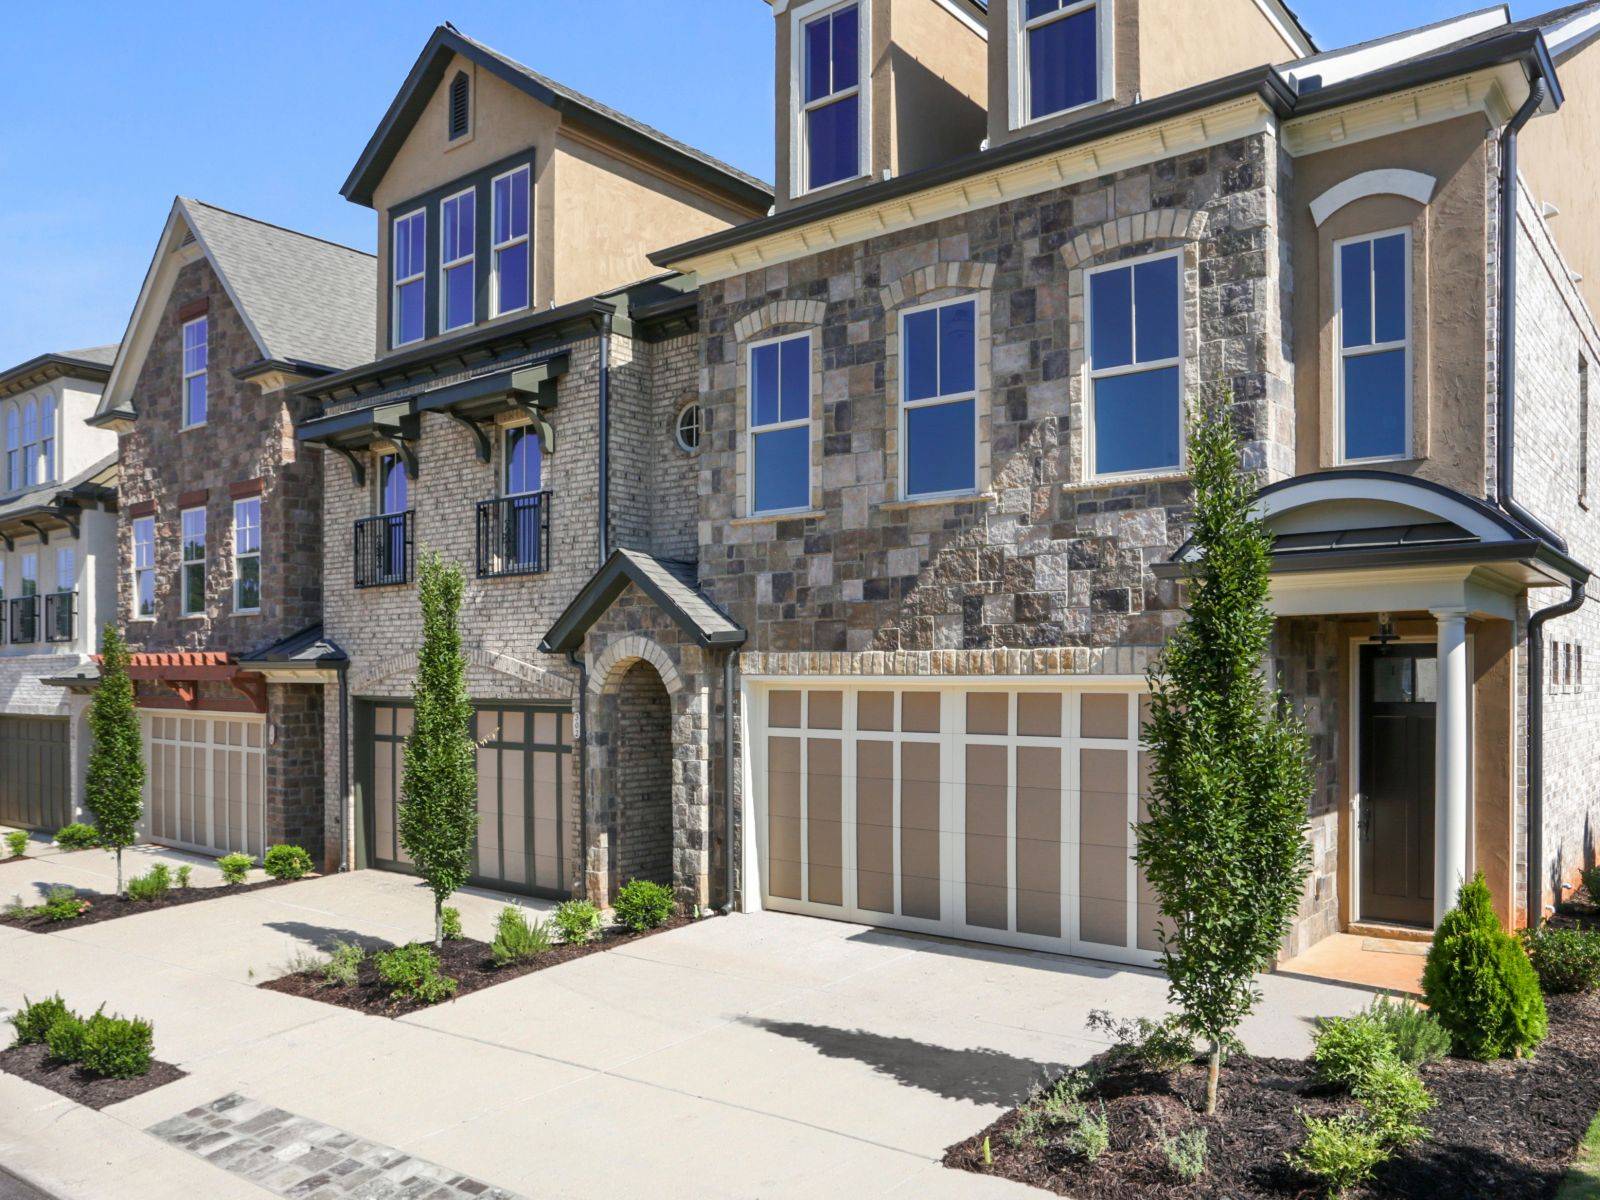 Tuscany Village Woodstock | New Townhomes for Sale in Woodstock GA | Velocity Real Estate